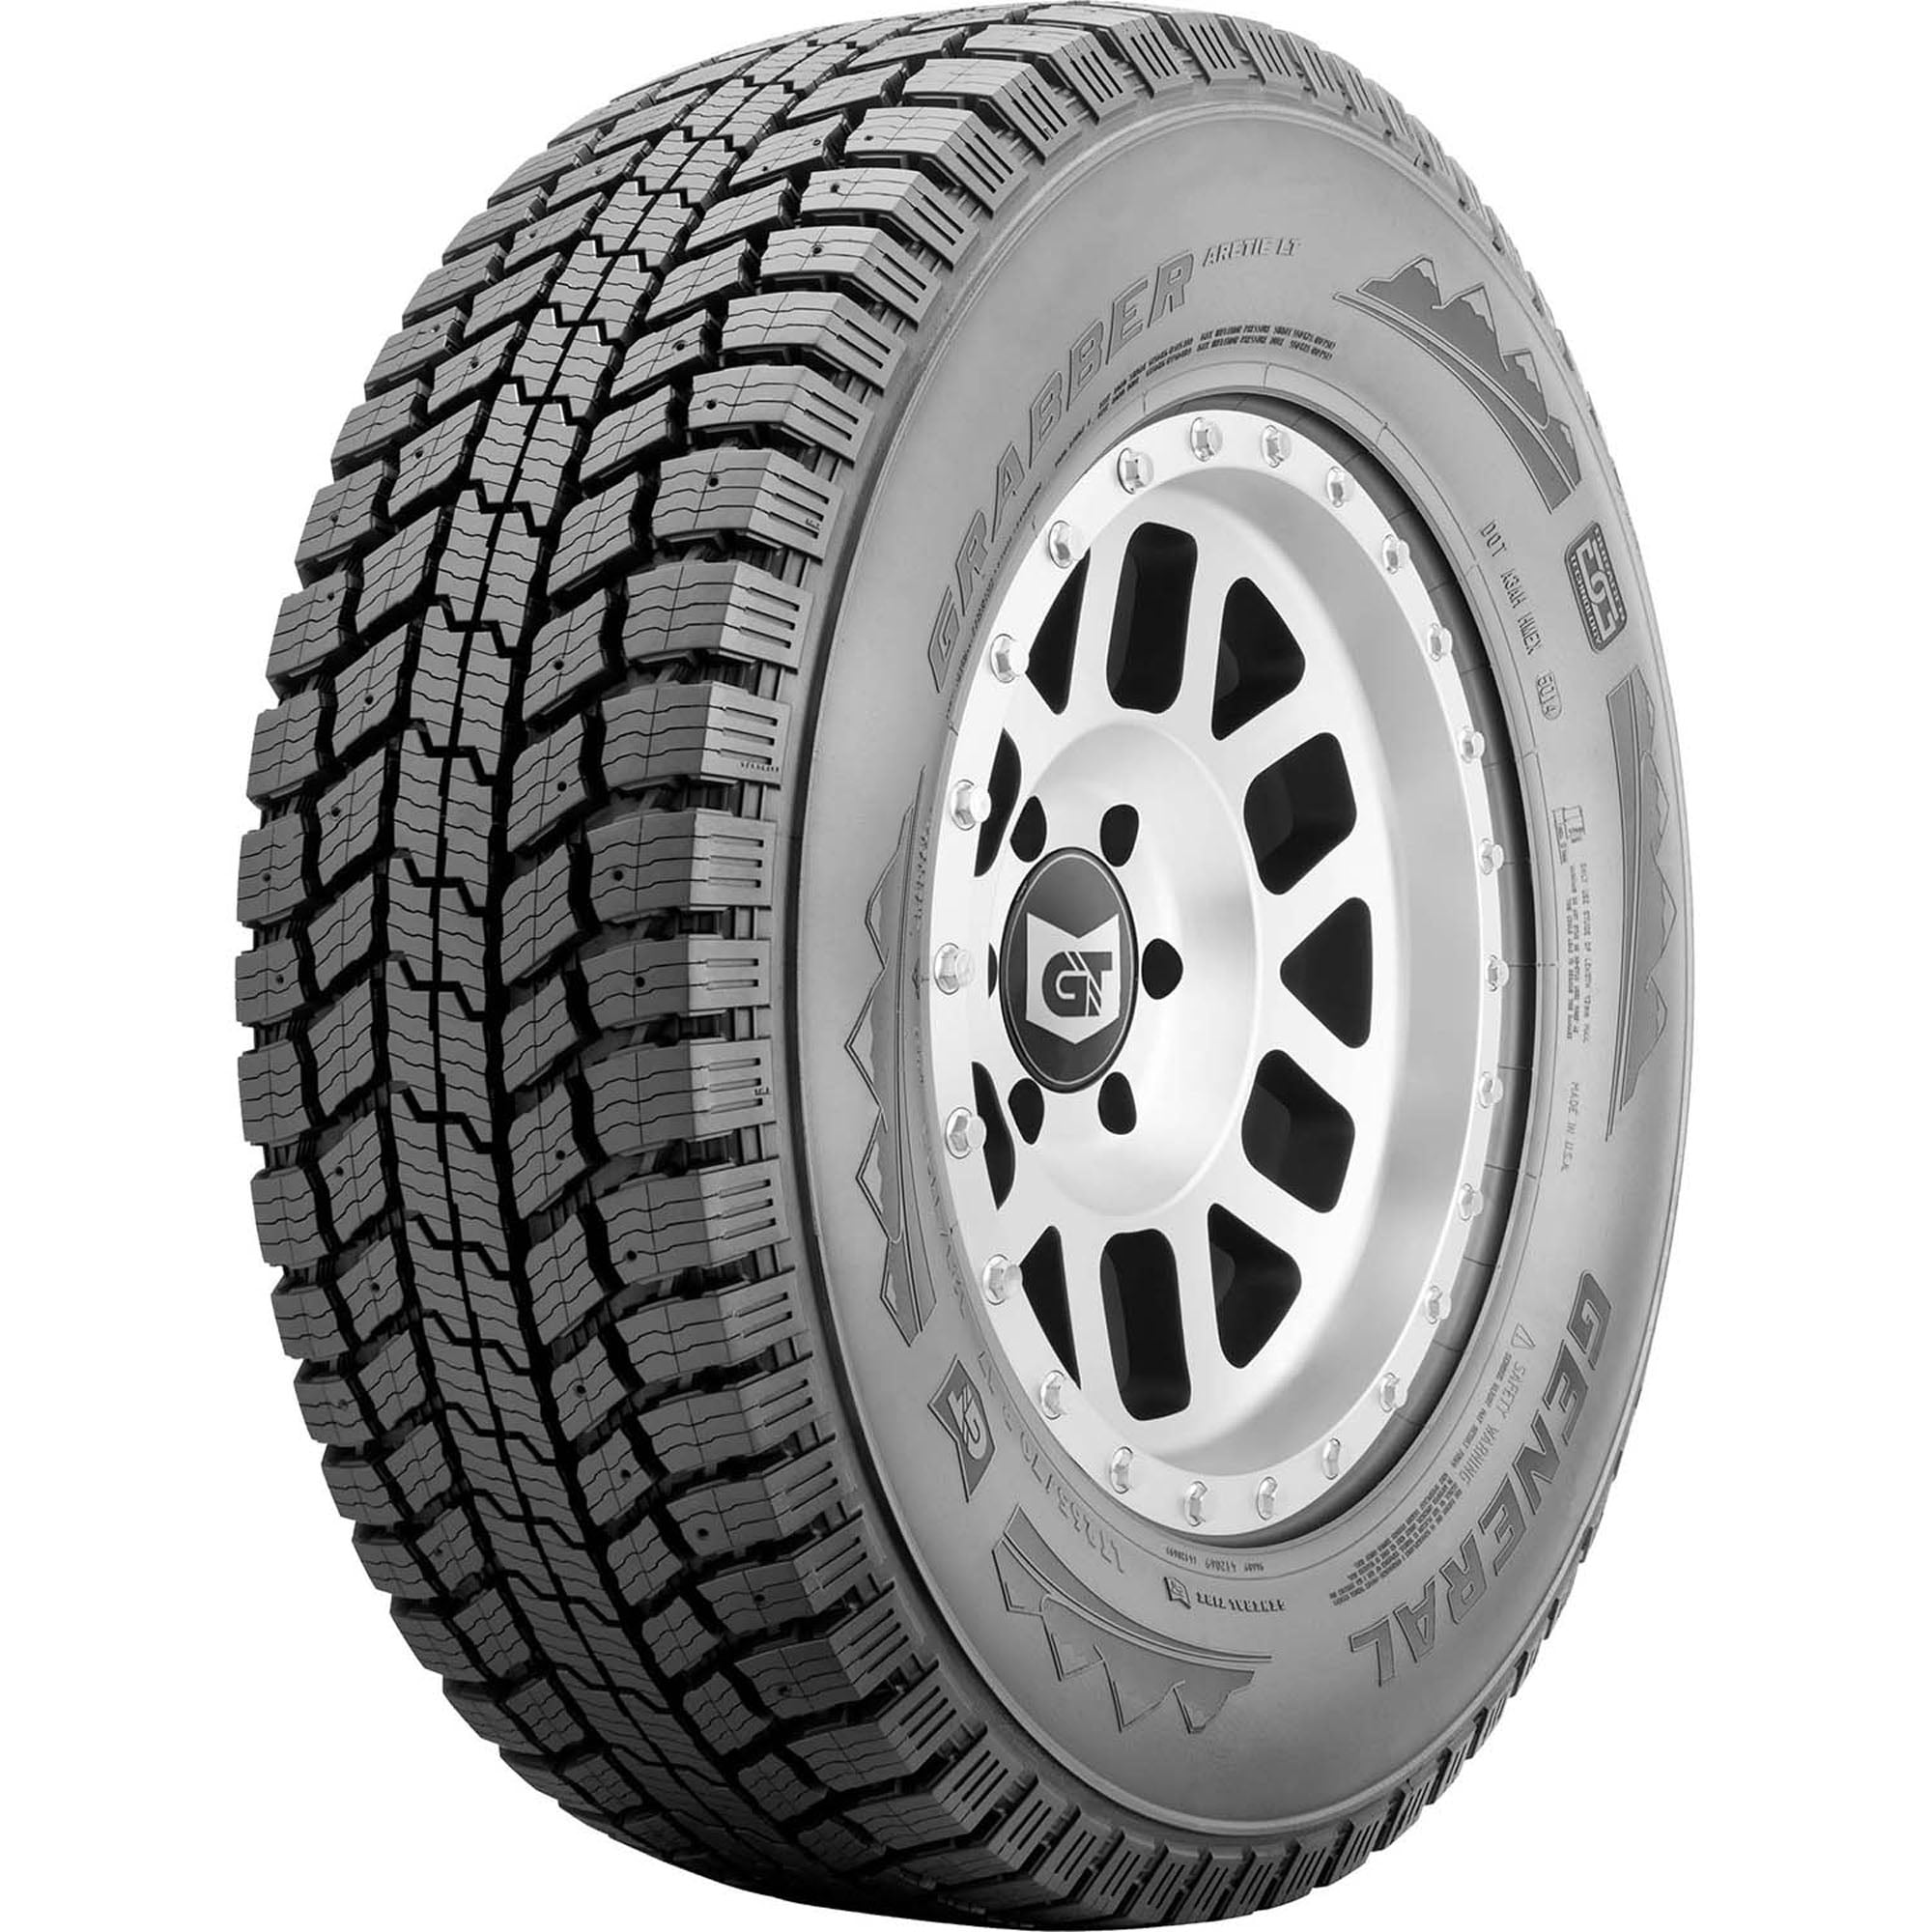 Set of 4 (FOUR) Evoluxx Rotator M/T LT 275/55R20 Load E 10 Ply MT Mud Tires  Fits: 2007-08 Toyota Tundra Limited, 2015 Ford F-150 Lariat